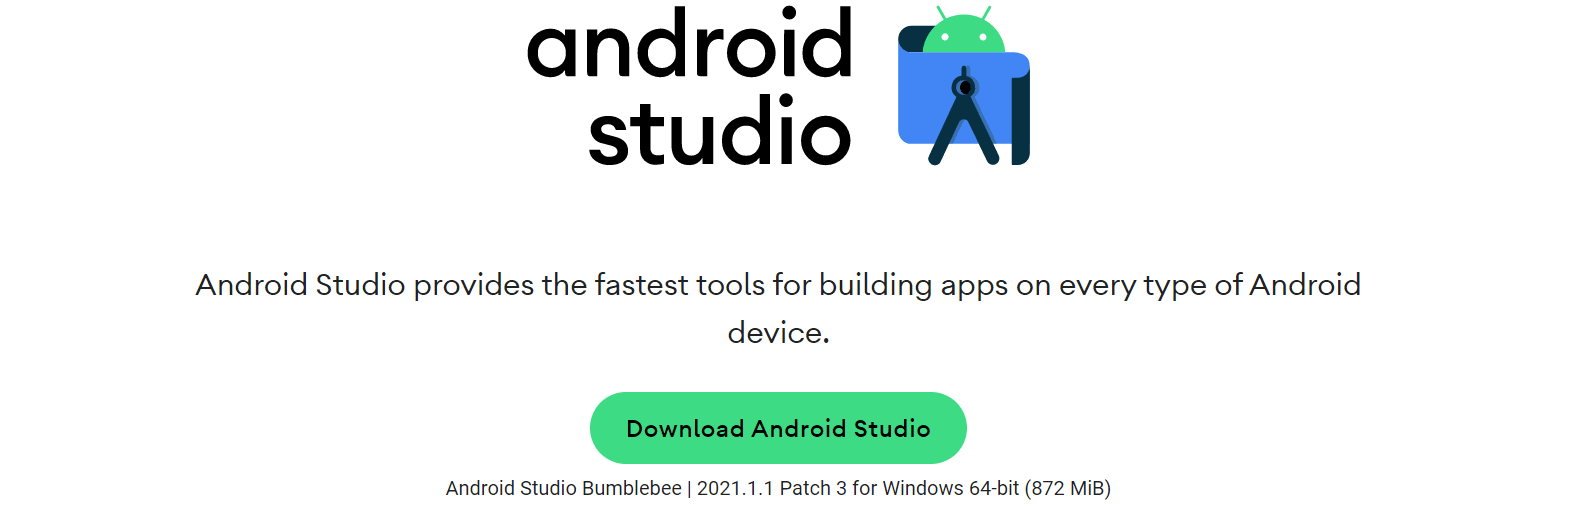 Best Android Emulator for Linux | LambdaTest